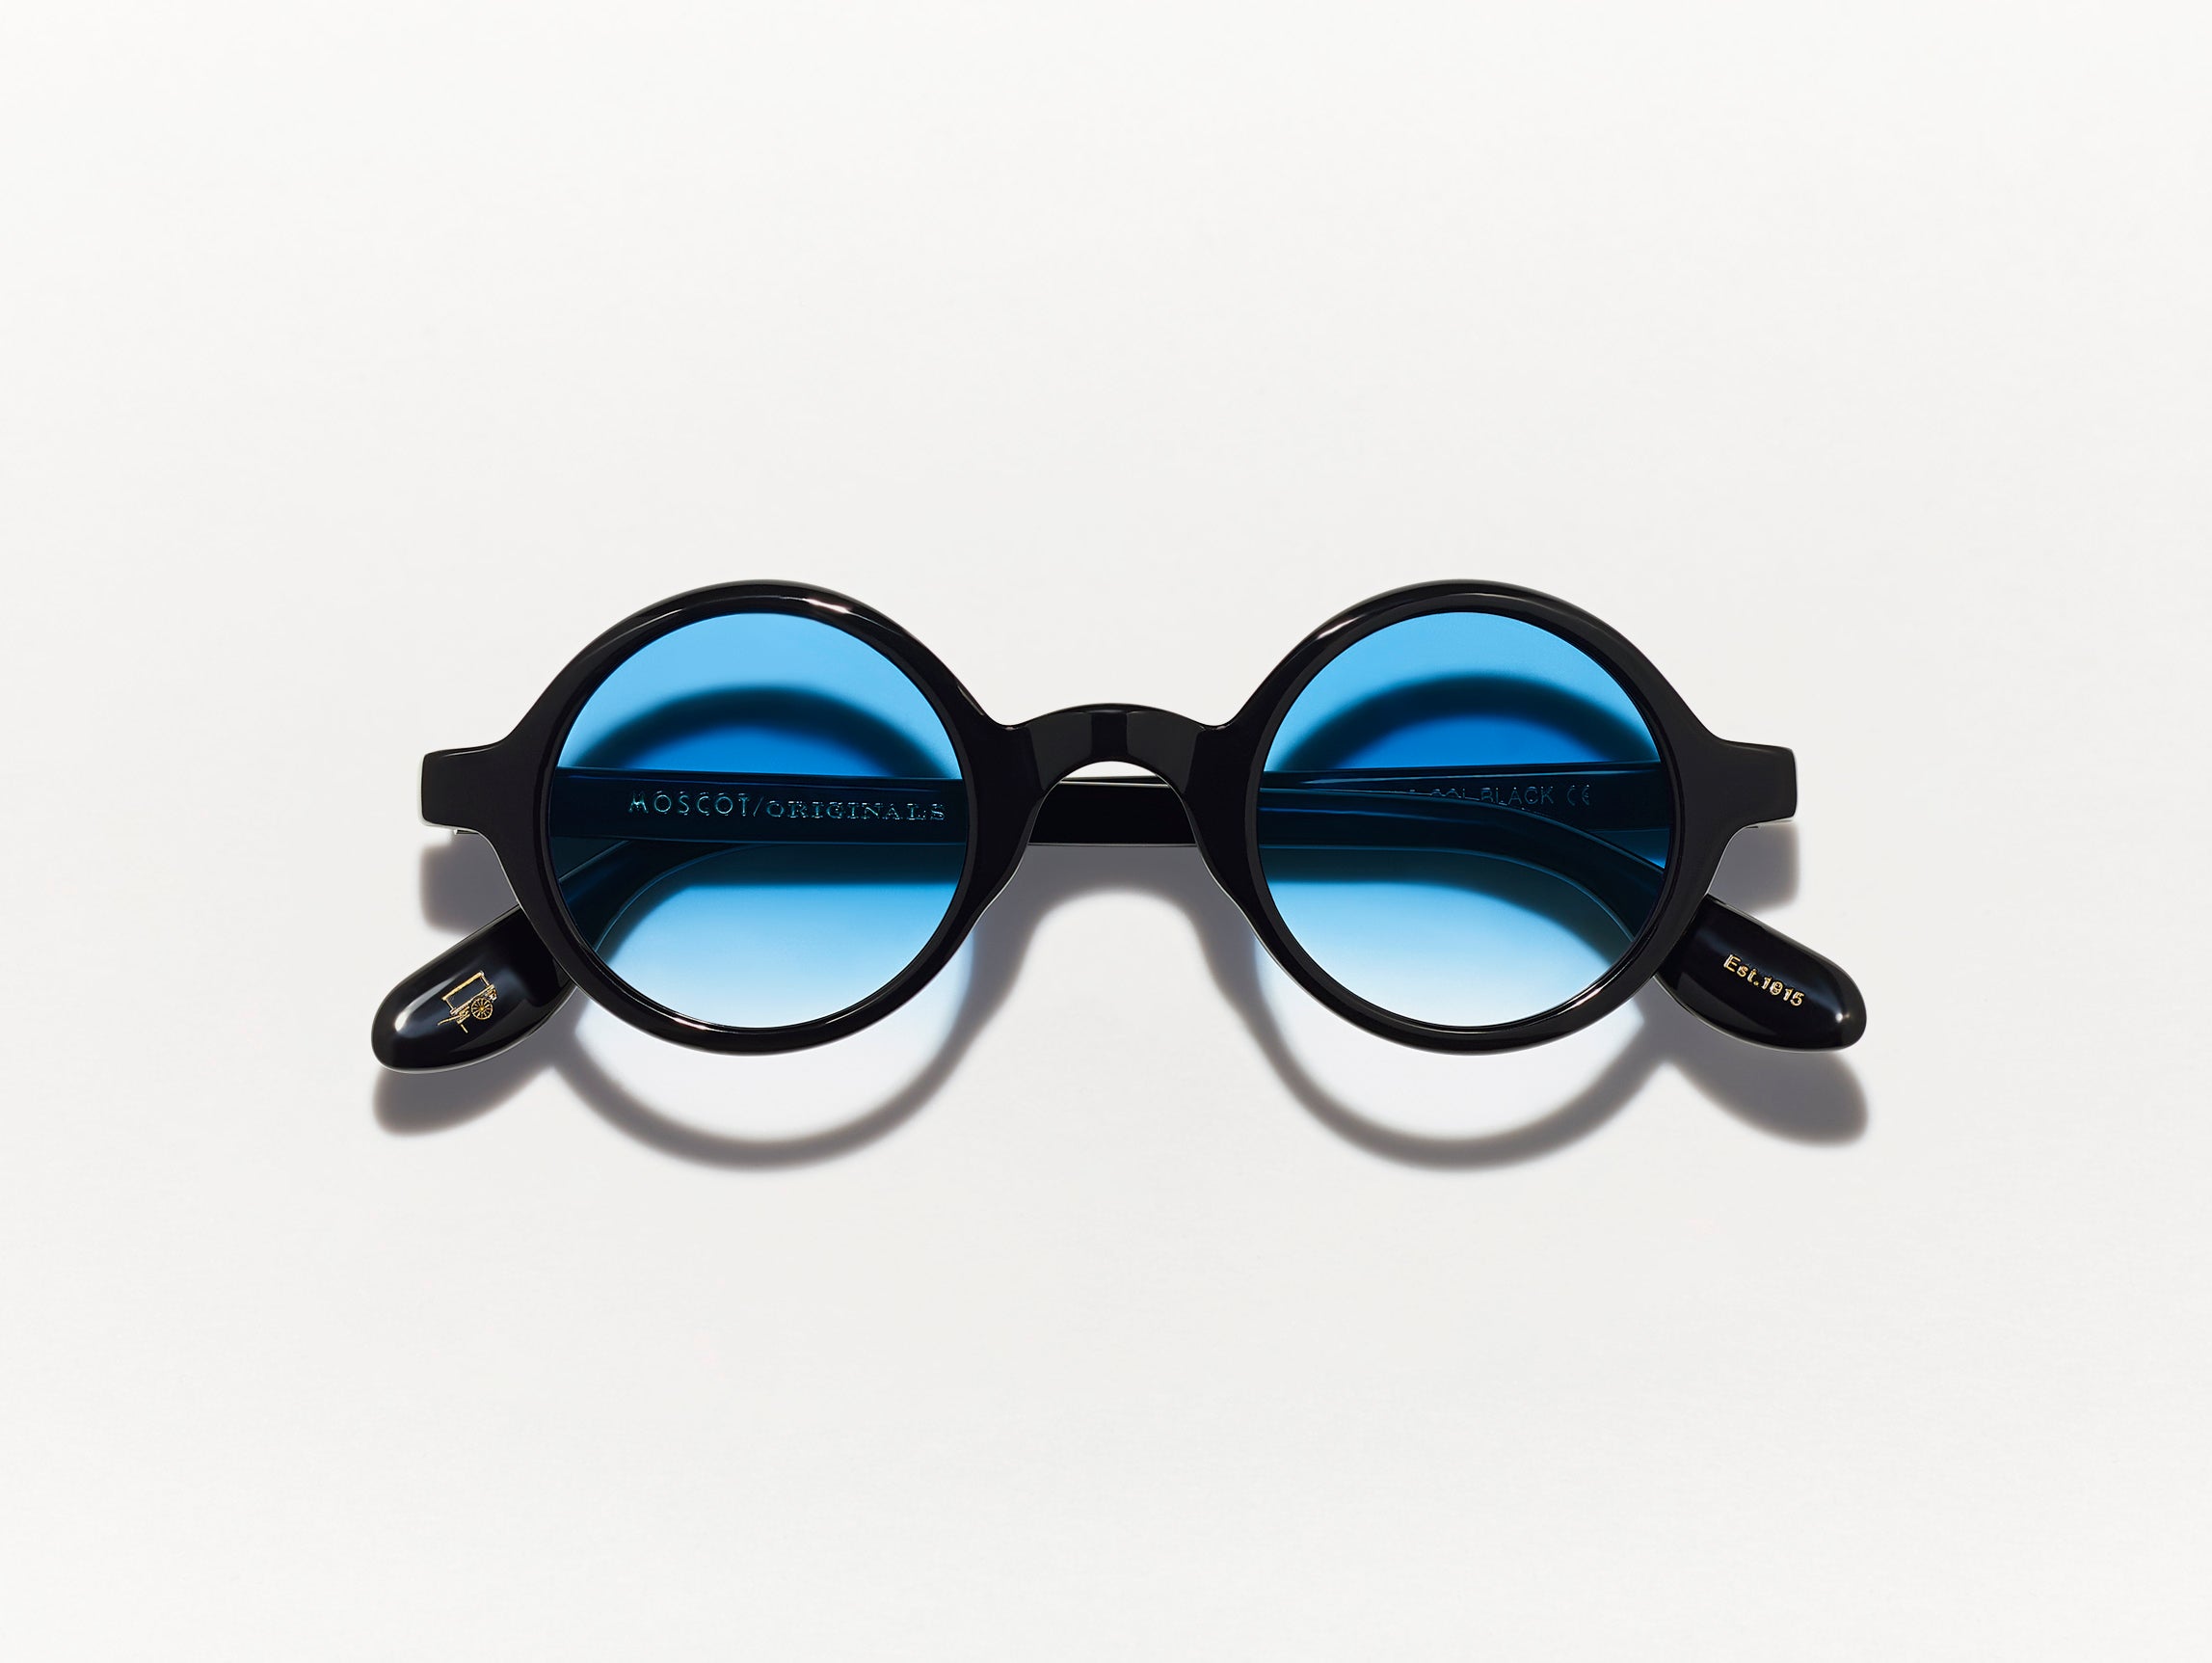 The ZOLMAN in Black with Broadway Blue Fade Tinted Lenses